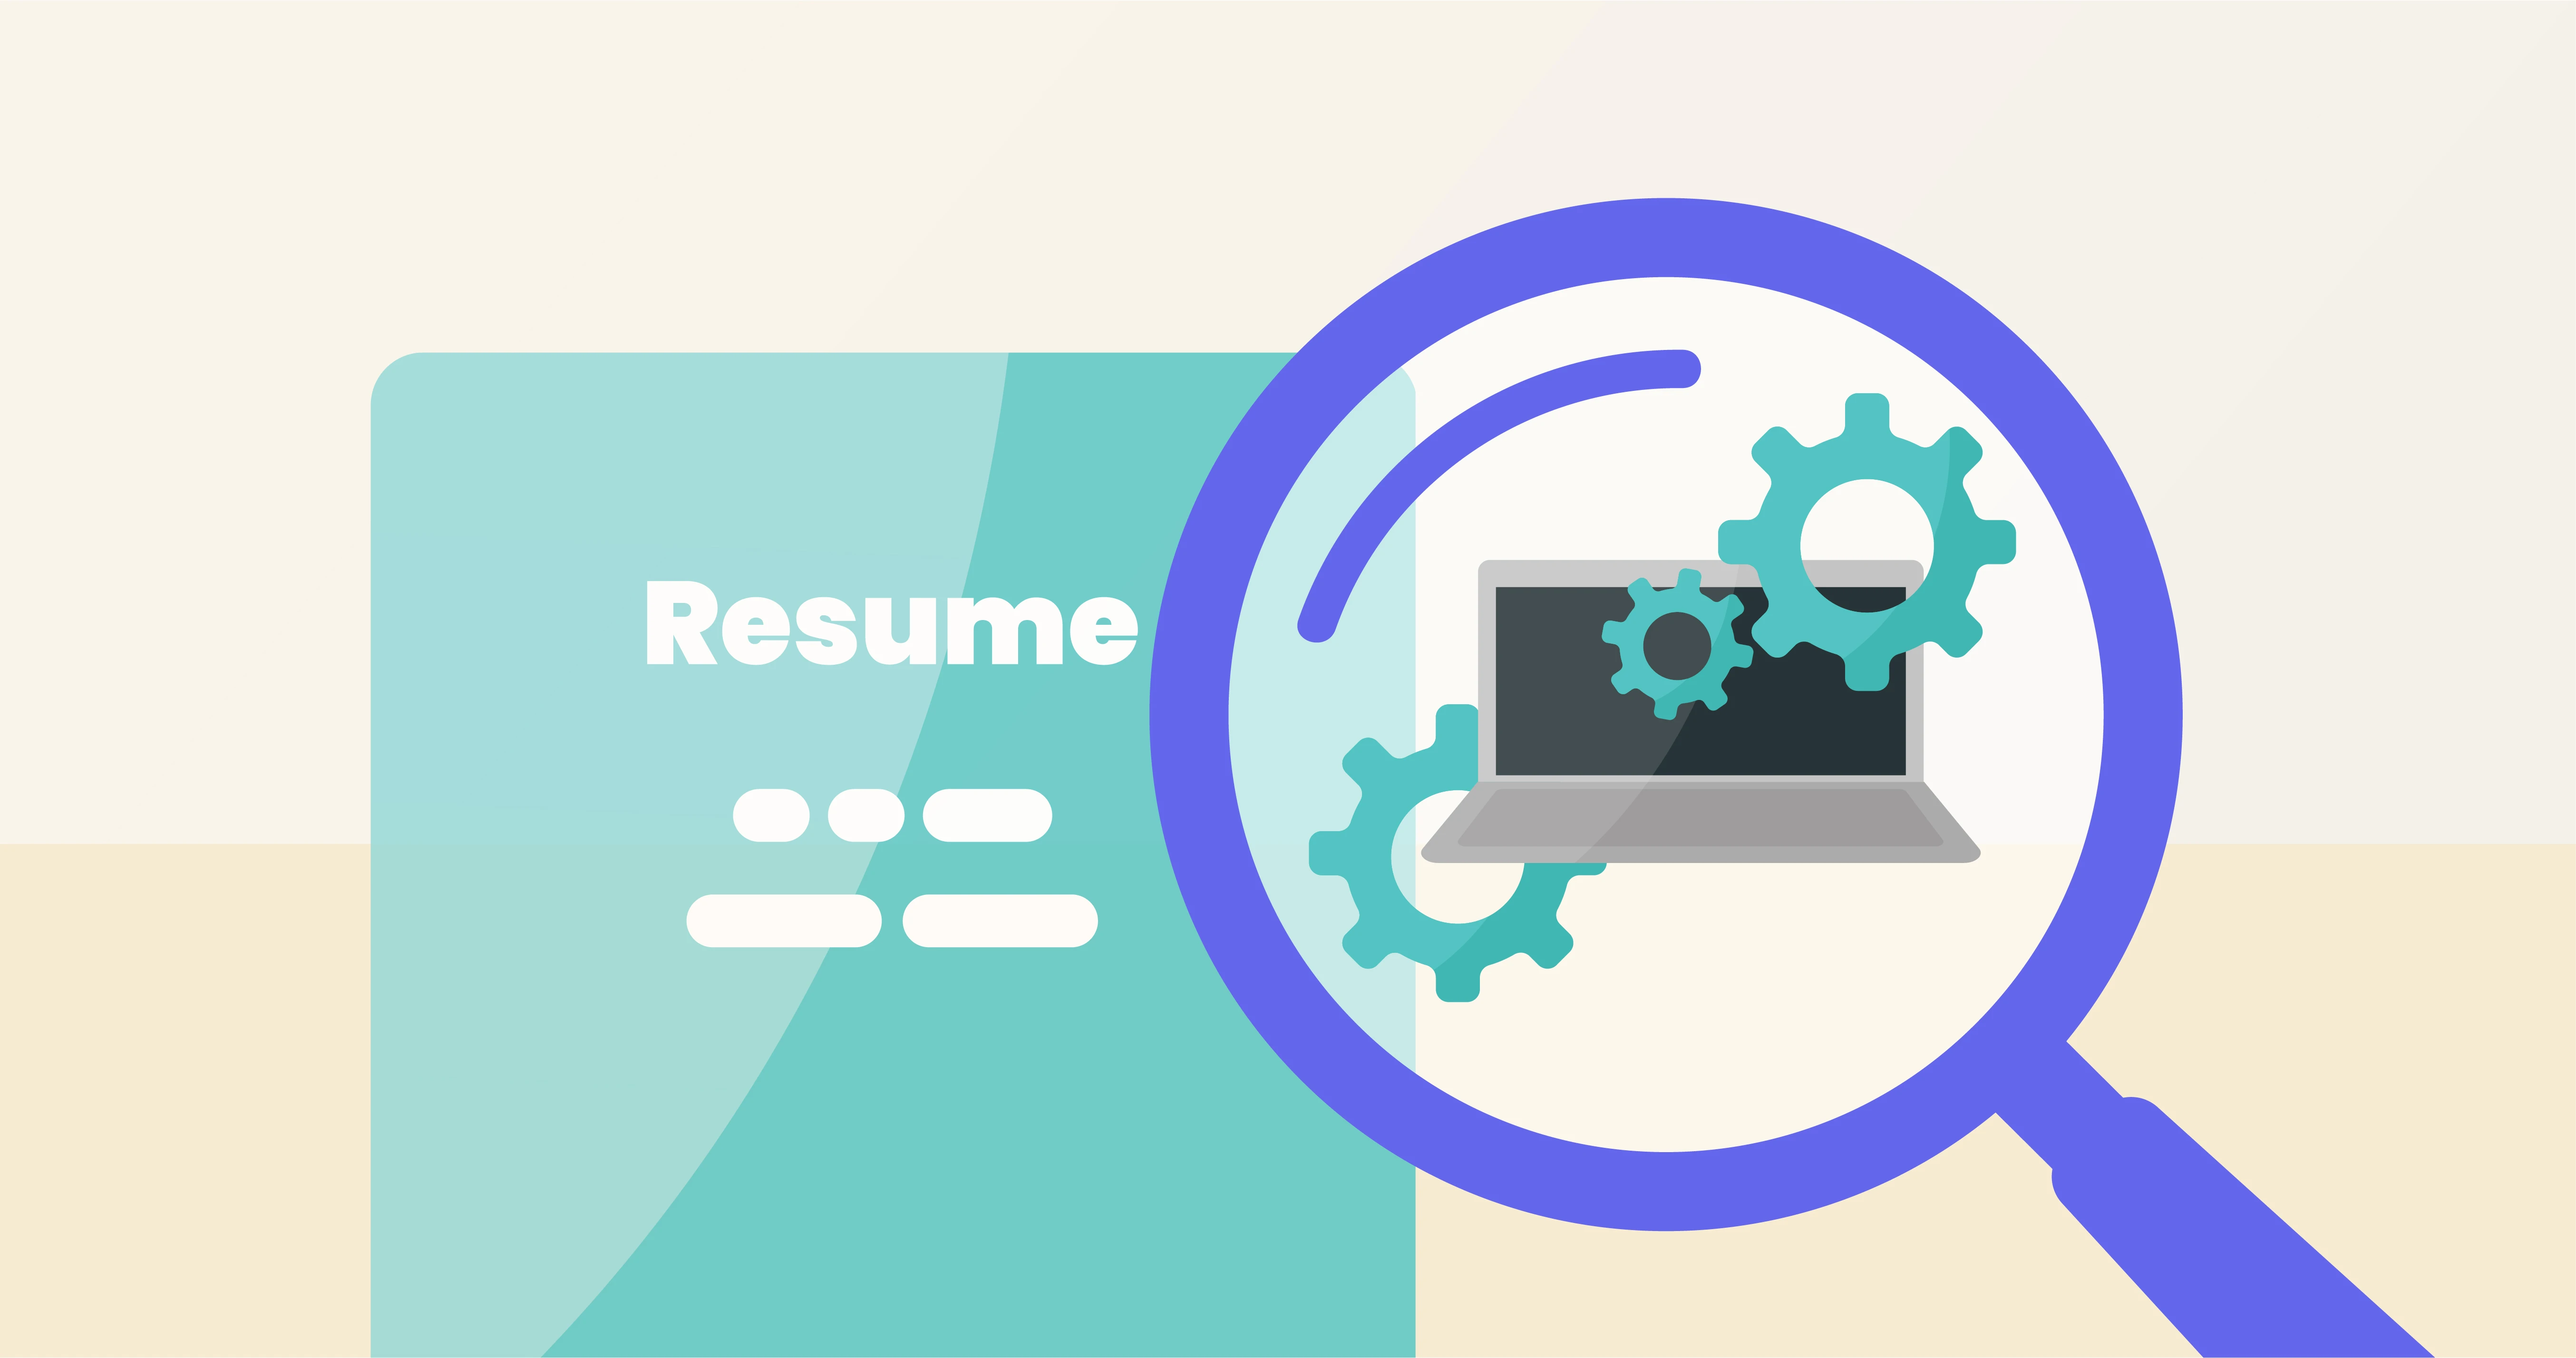 What Hard Skills Should You Put On Your Resume?